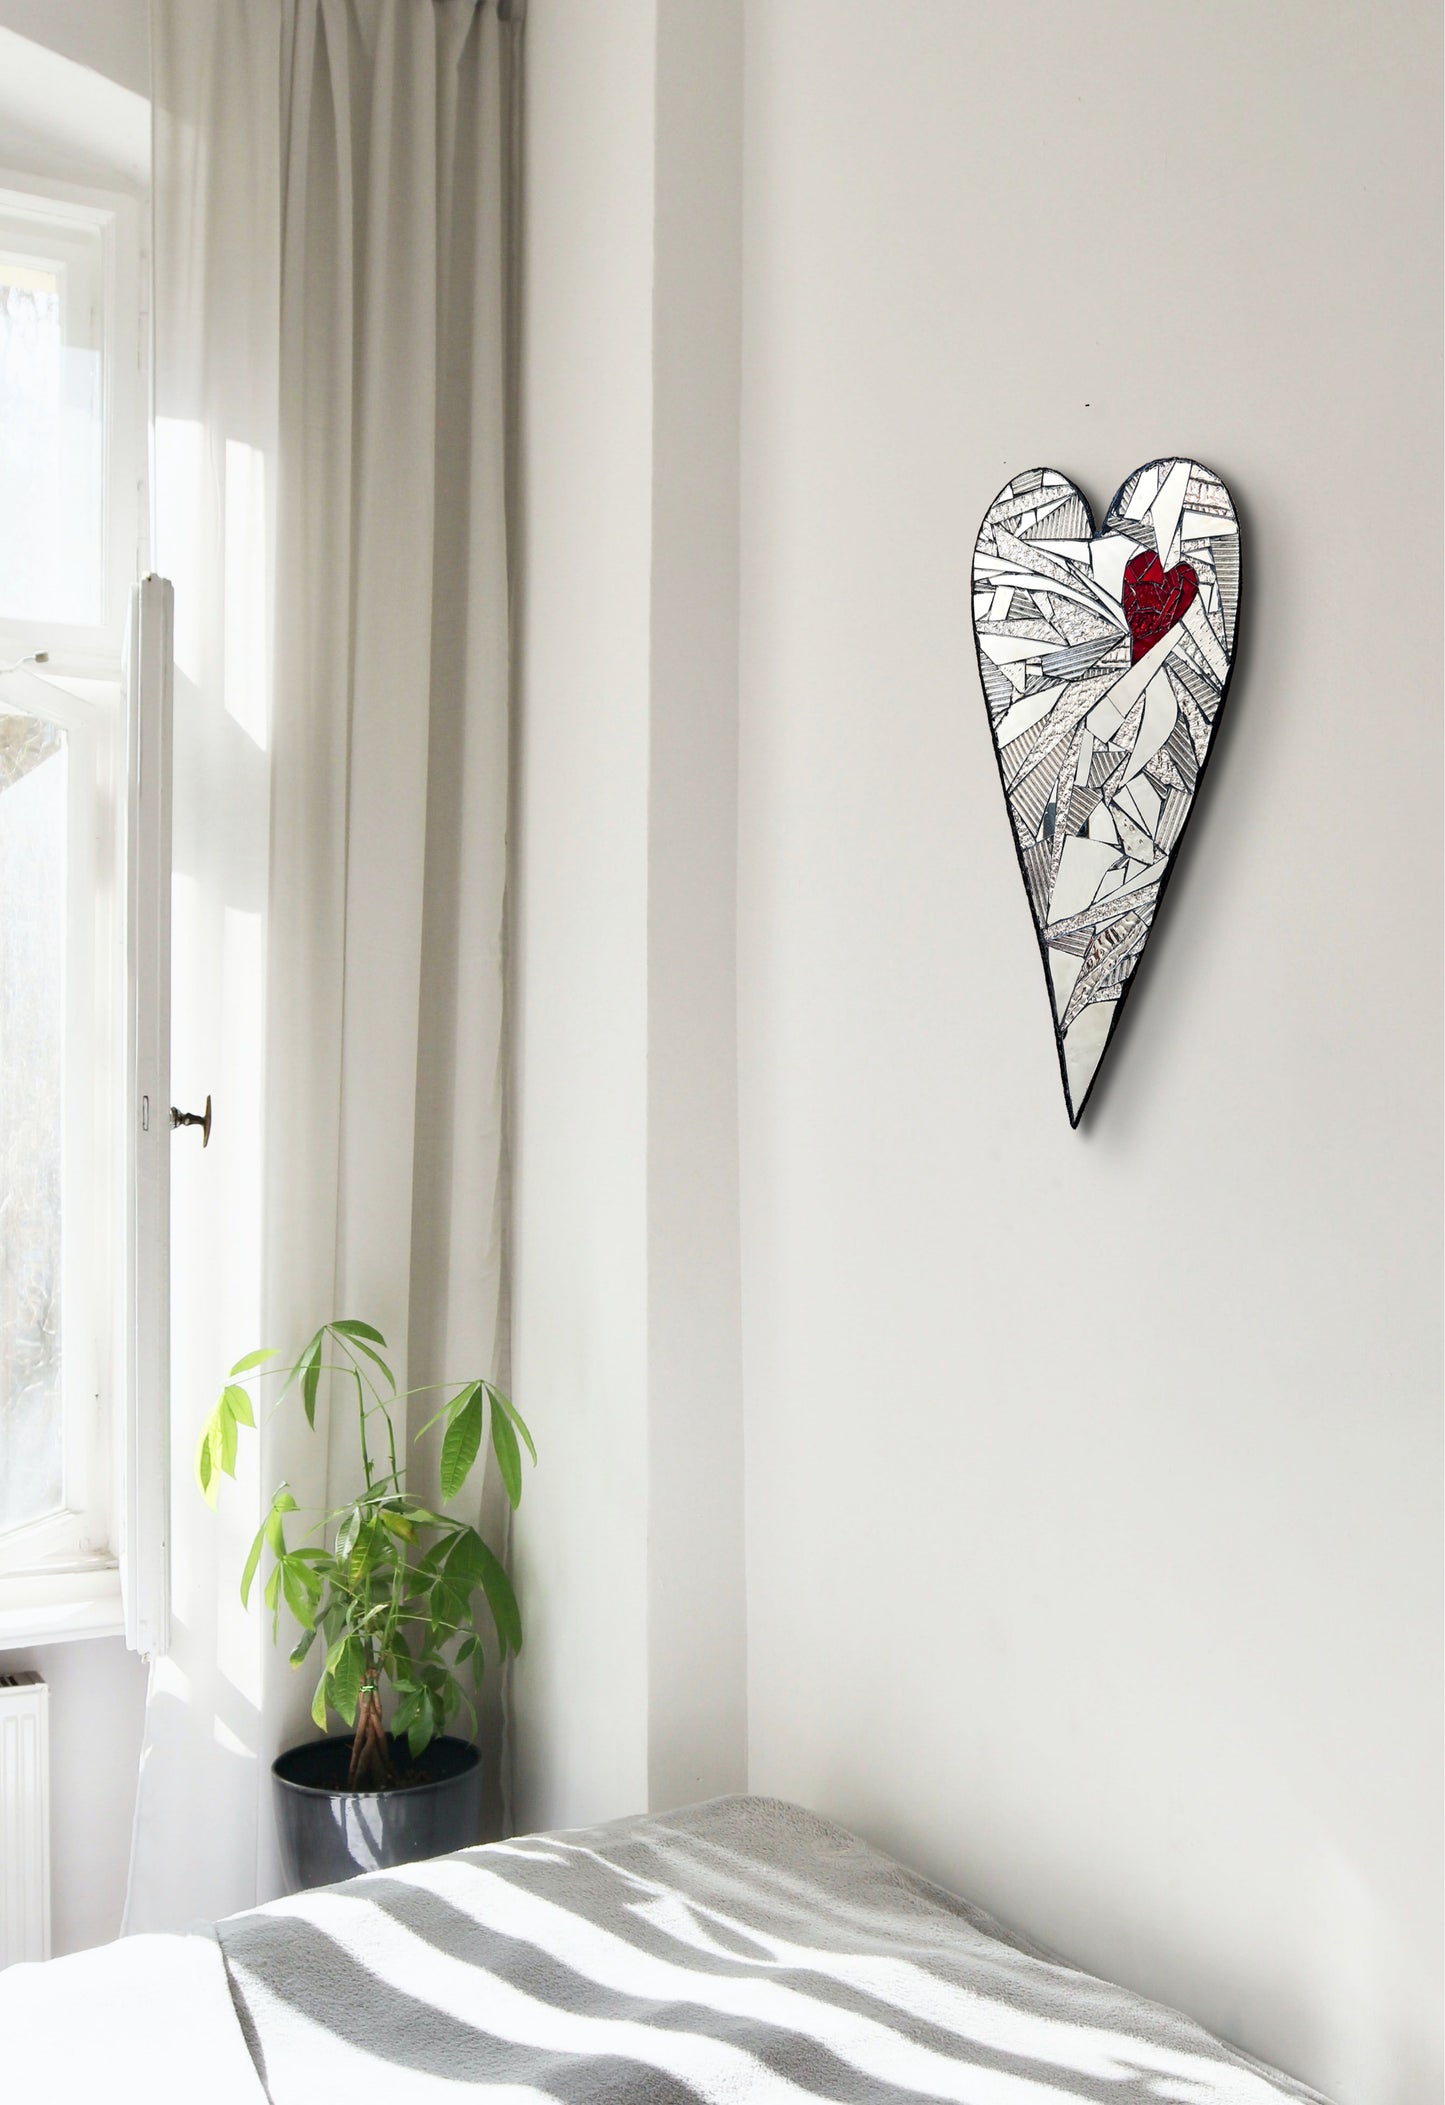 Heart-shaped mosaic made of mirrored-glass pieces with red mirror heart shape inside by Denise Marshall in situ - title 'All Heart!'